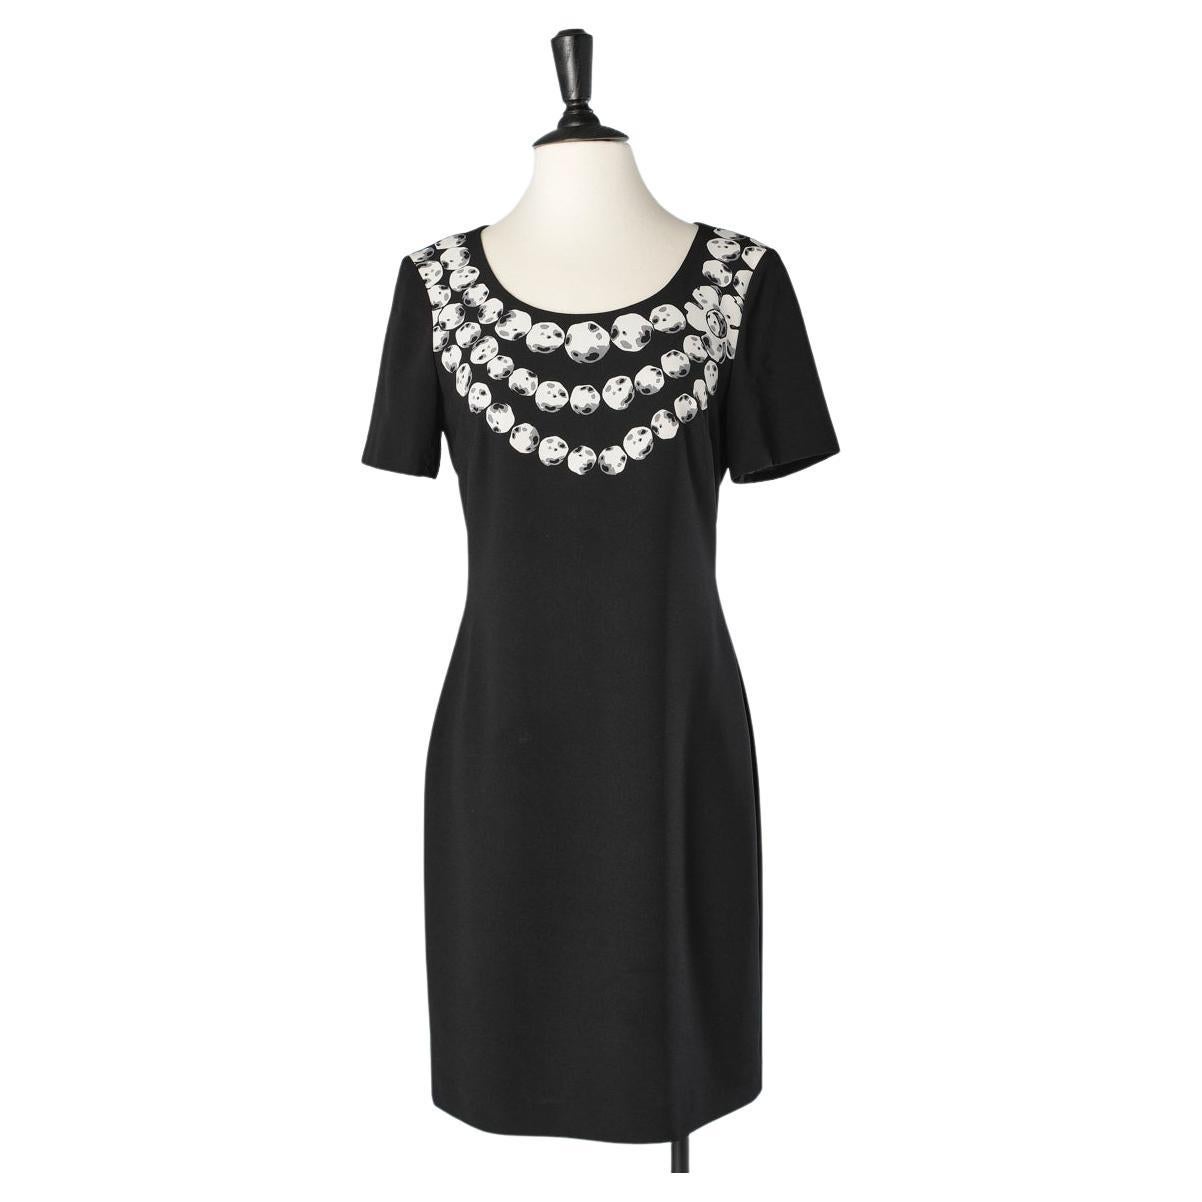 Black cocktail dress with pearls neckless print Moschino Cheap& Chic  For Sale